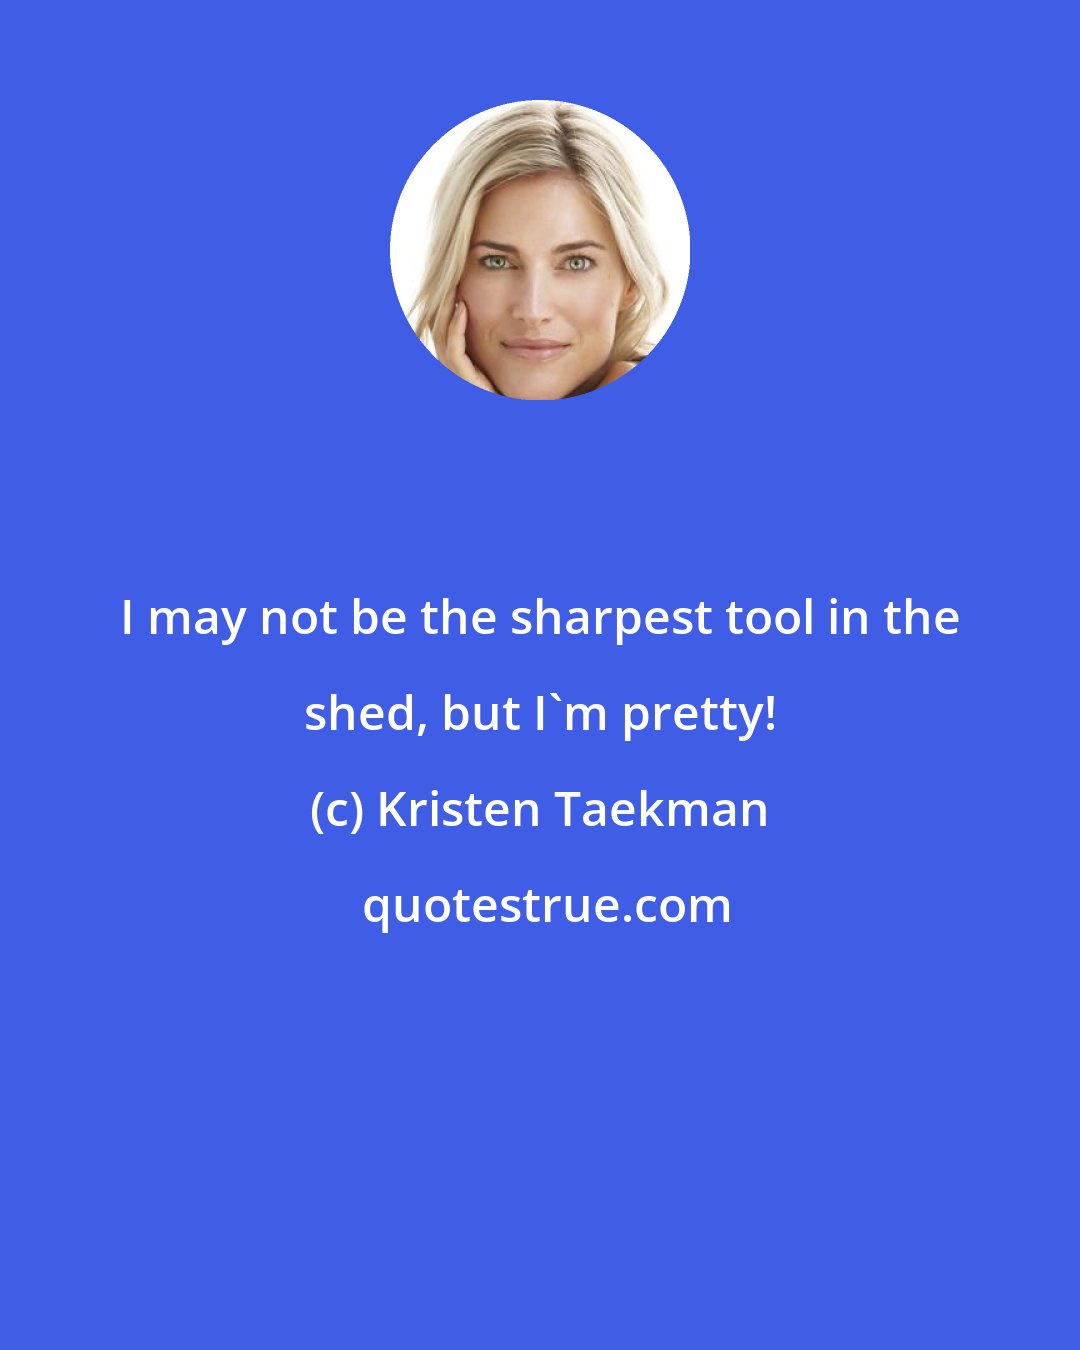 Kristen Taekman: I may not be the sharpest tool in the shed, but I'm pretty!